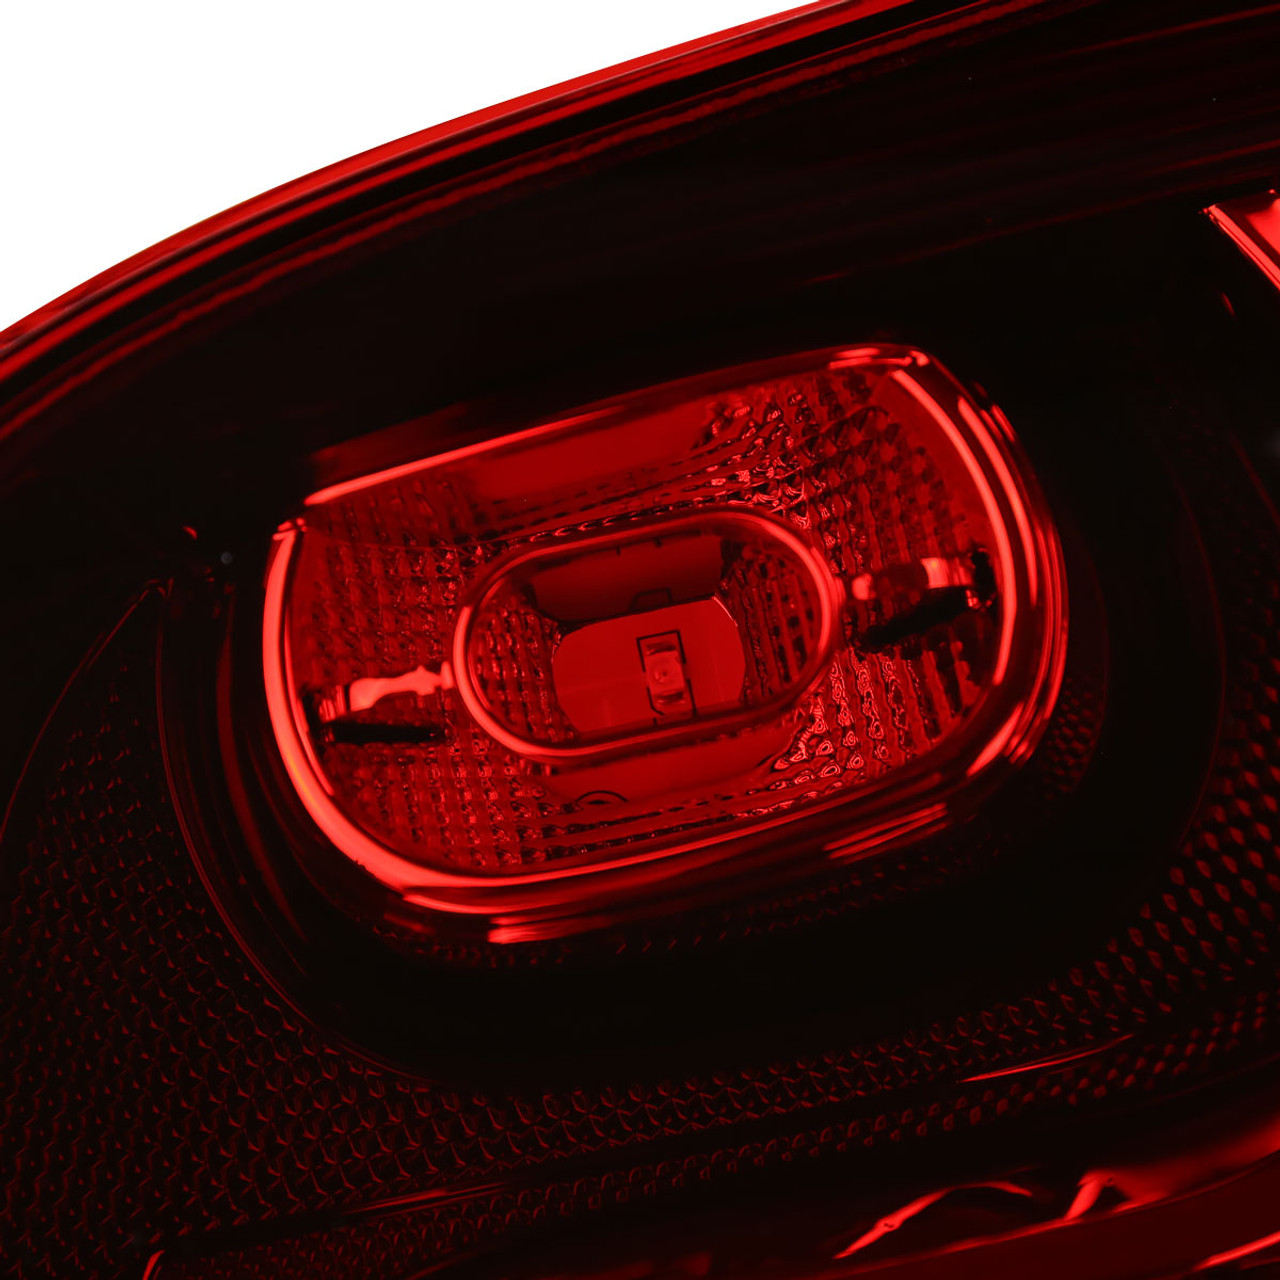 2010-2014 Volkswagen Golf/GTI LED Tail Lights w/ Sequential Turn